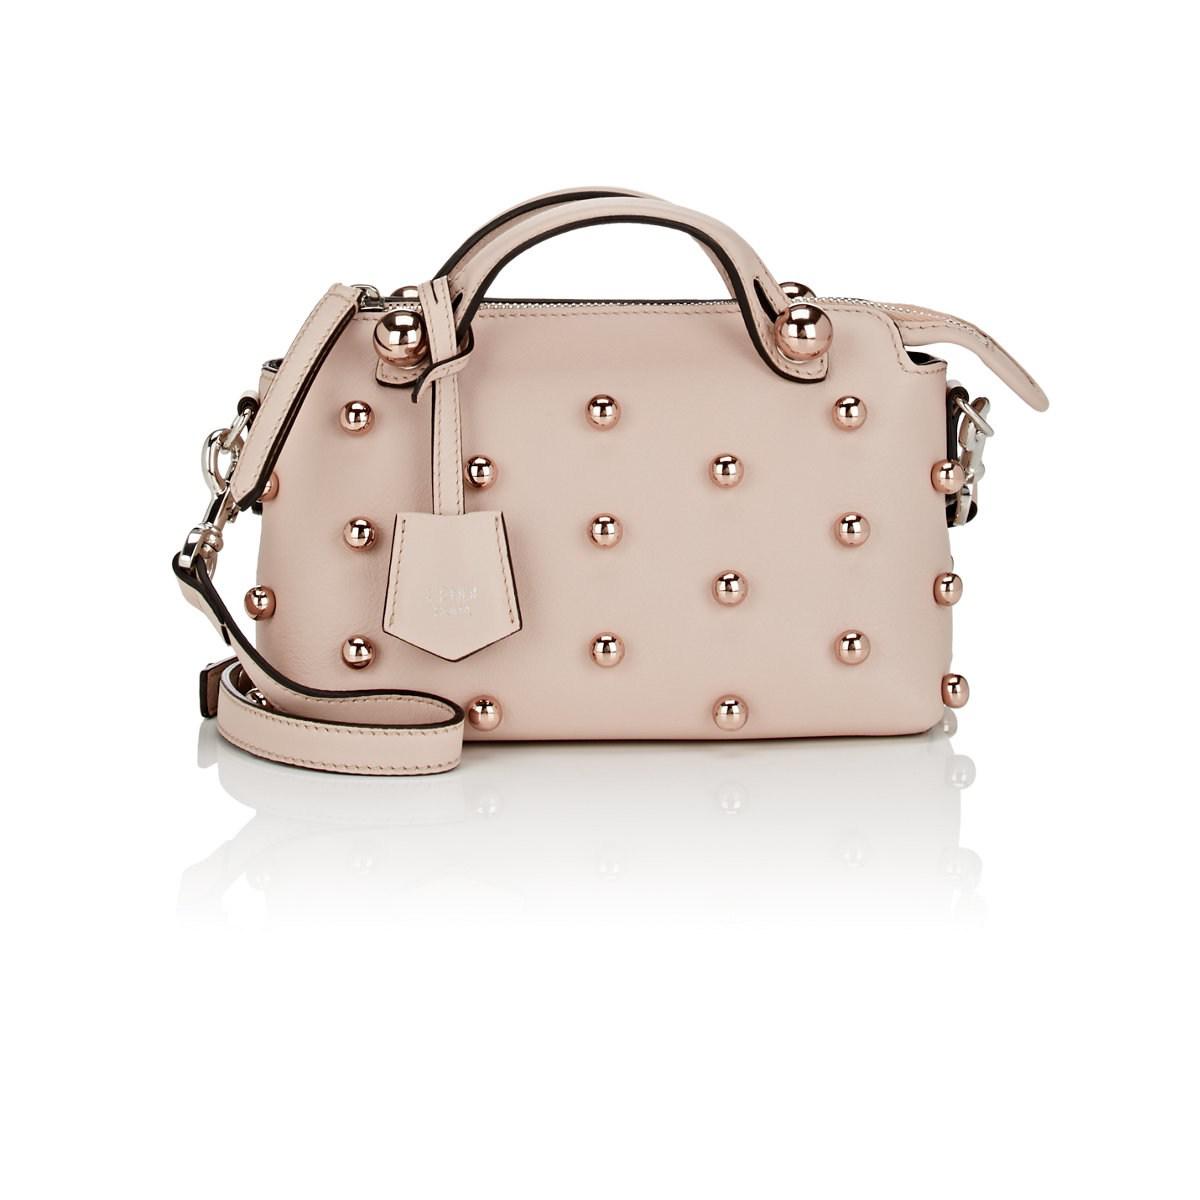 Fendi By The Way Mini Leather Shoulder Bag in Light Pink (Pink) - Lyst